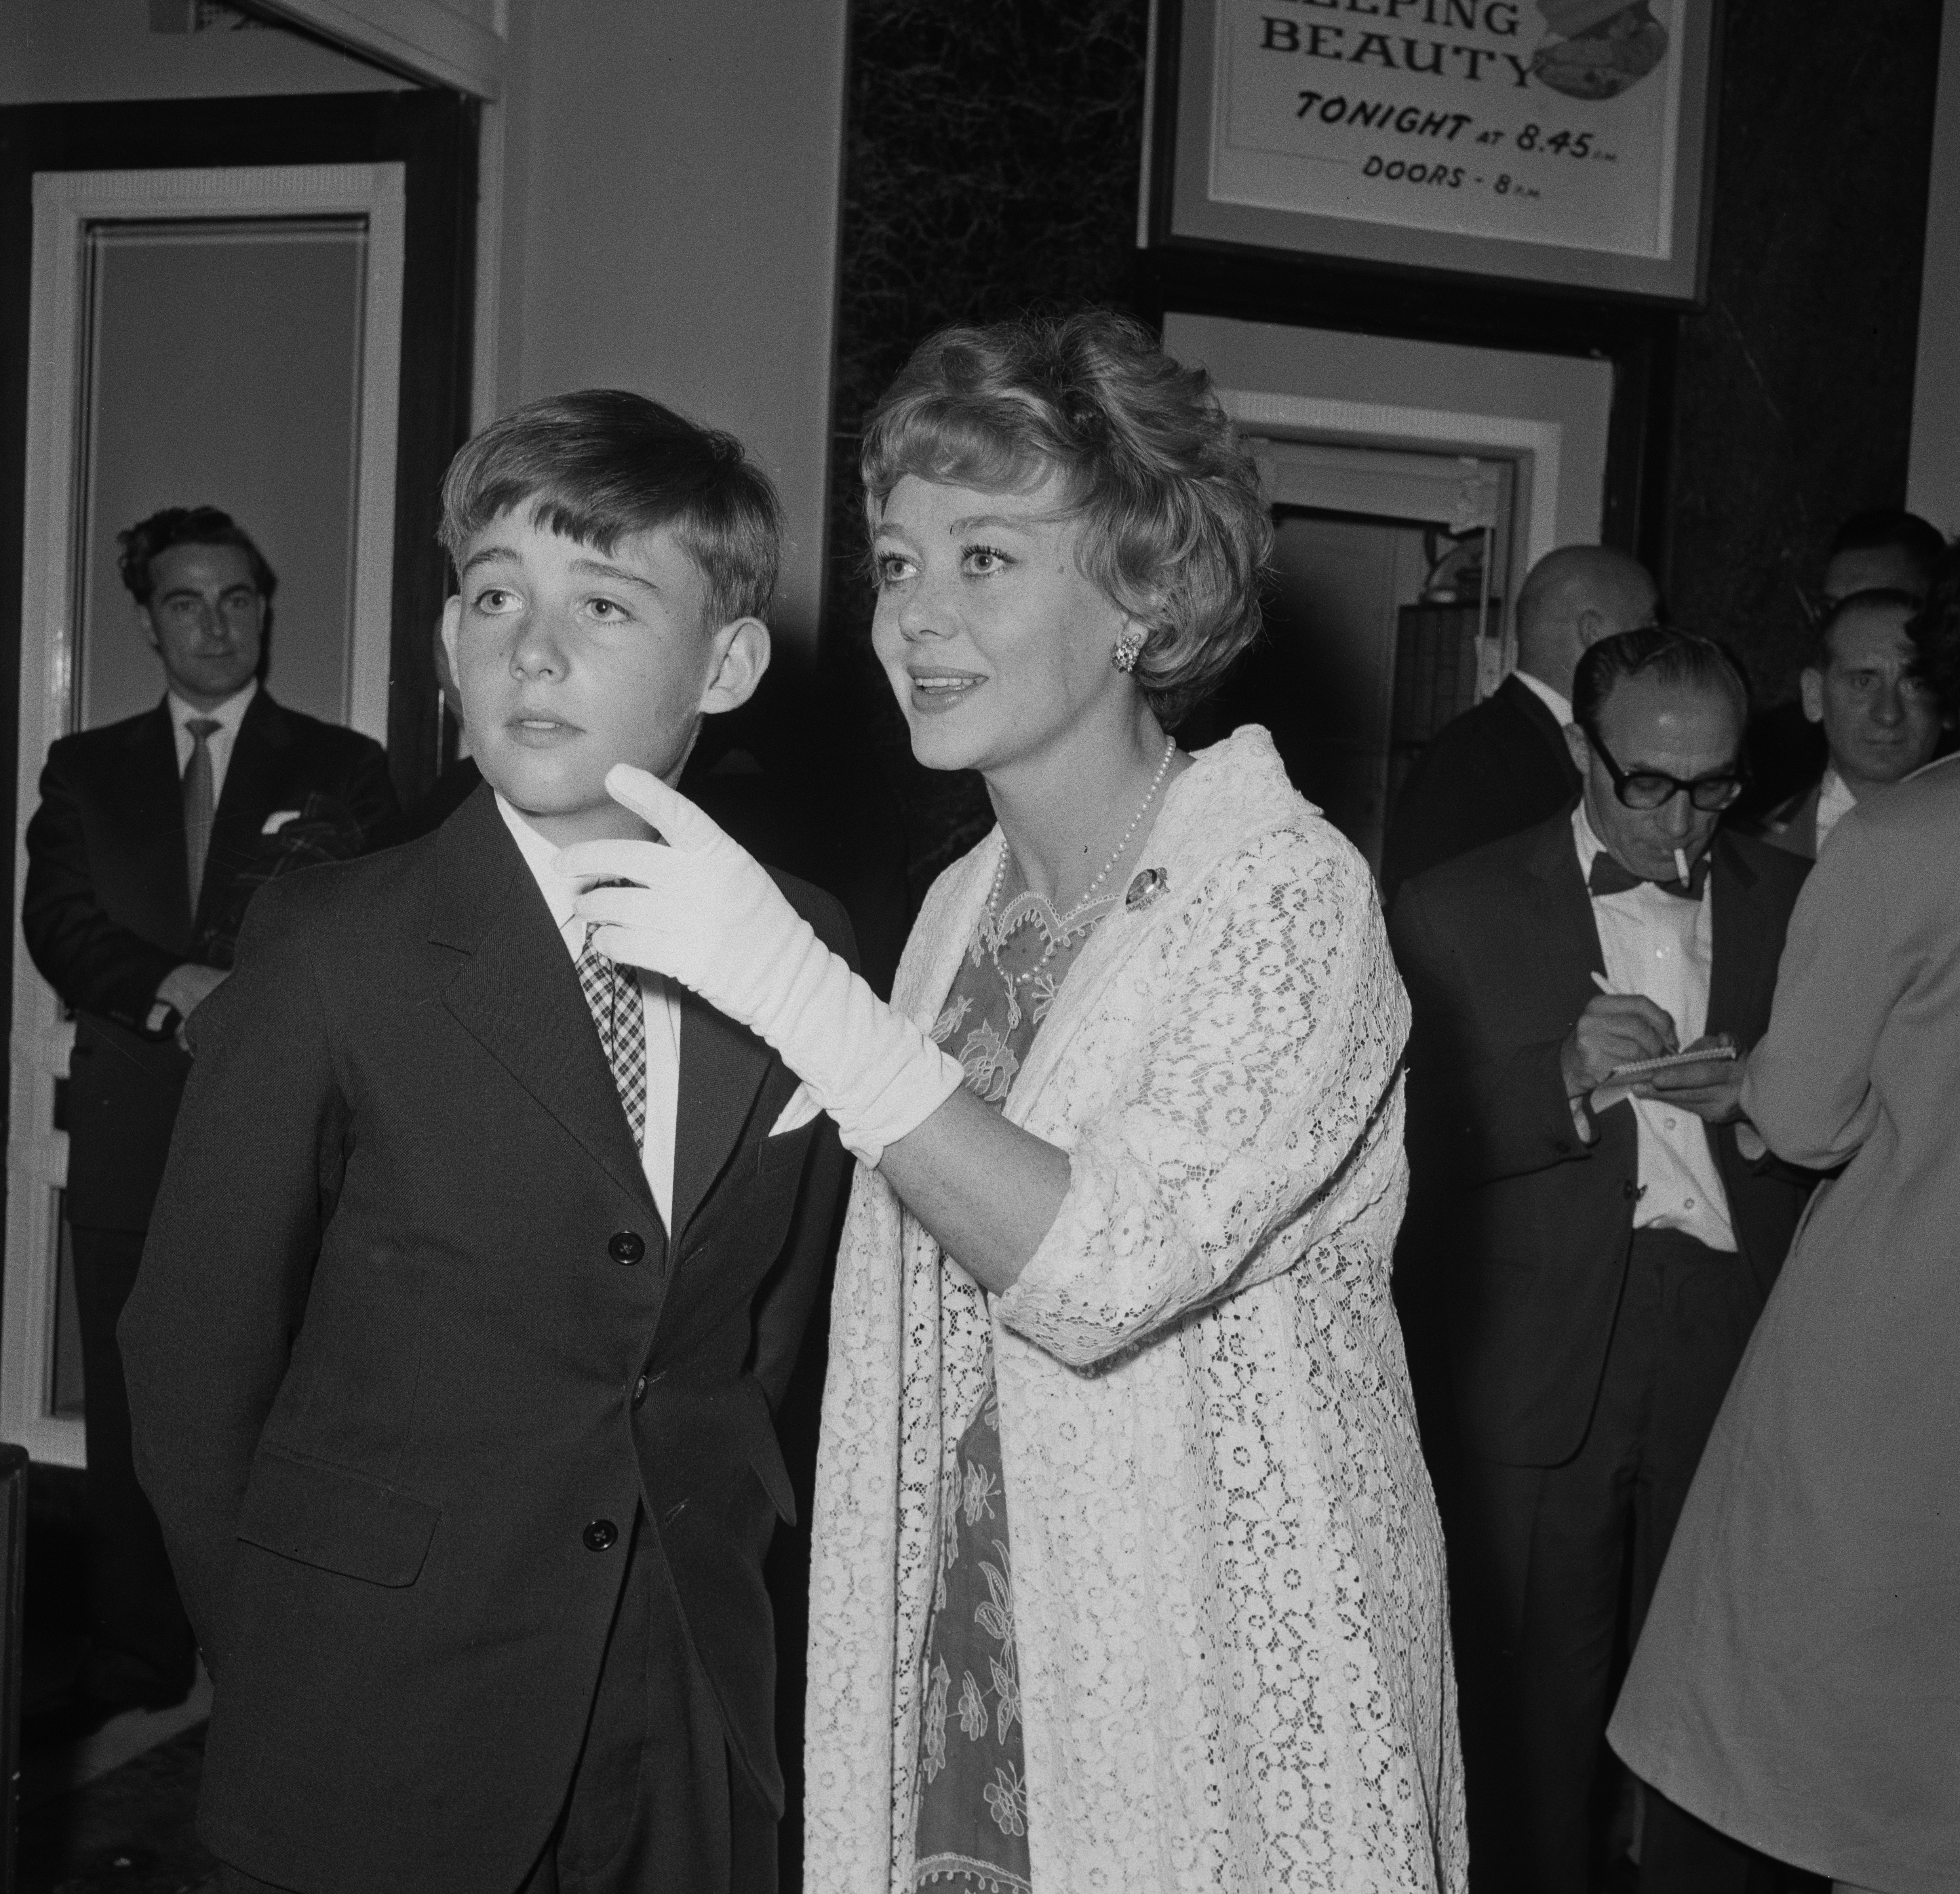 Glynis Johns and her son Gareth Forwood at the film premiere of "Sleeping Beauty," Astoria Theatre in London on August 10, 1959 | Source: Getty Images